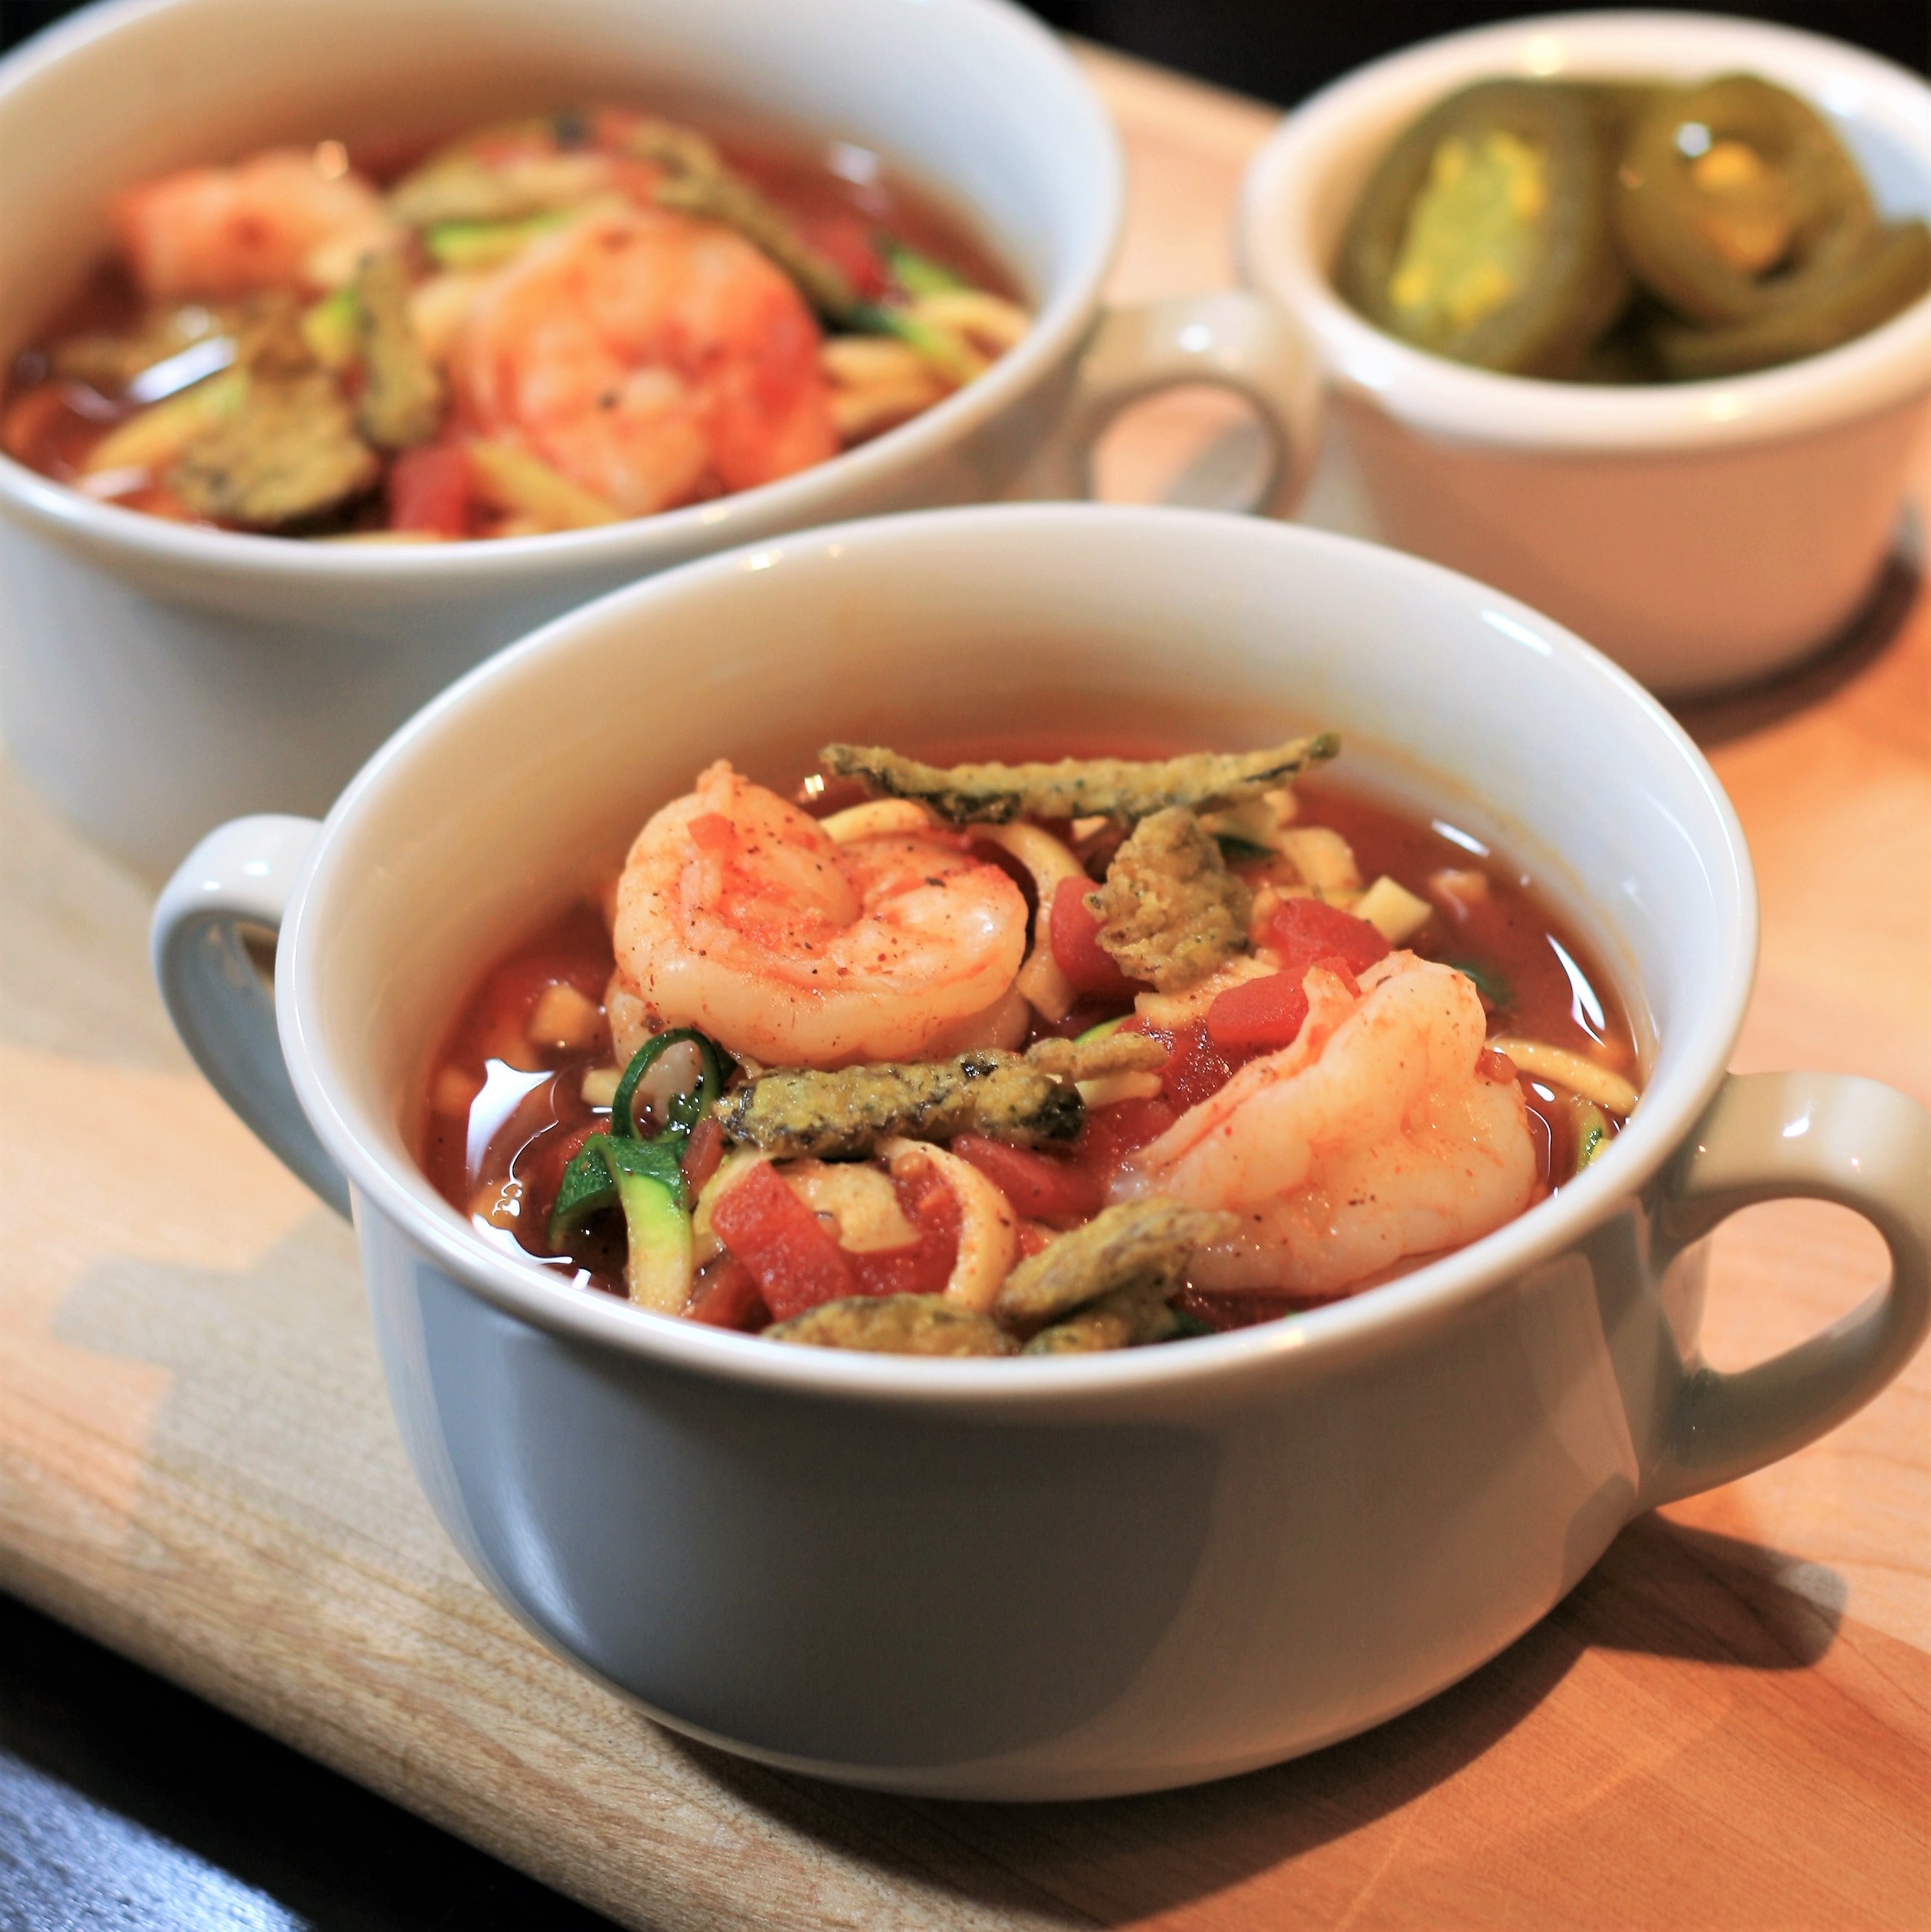 Spicy Shrimp Tortilla Soup with Zucchini Noodles